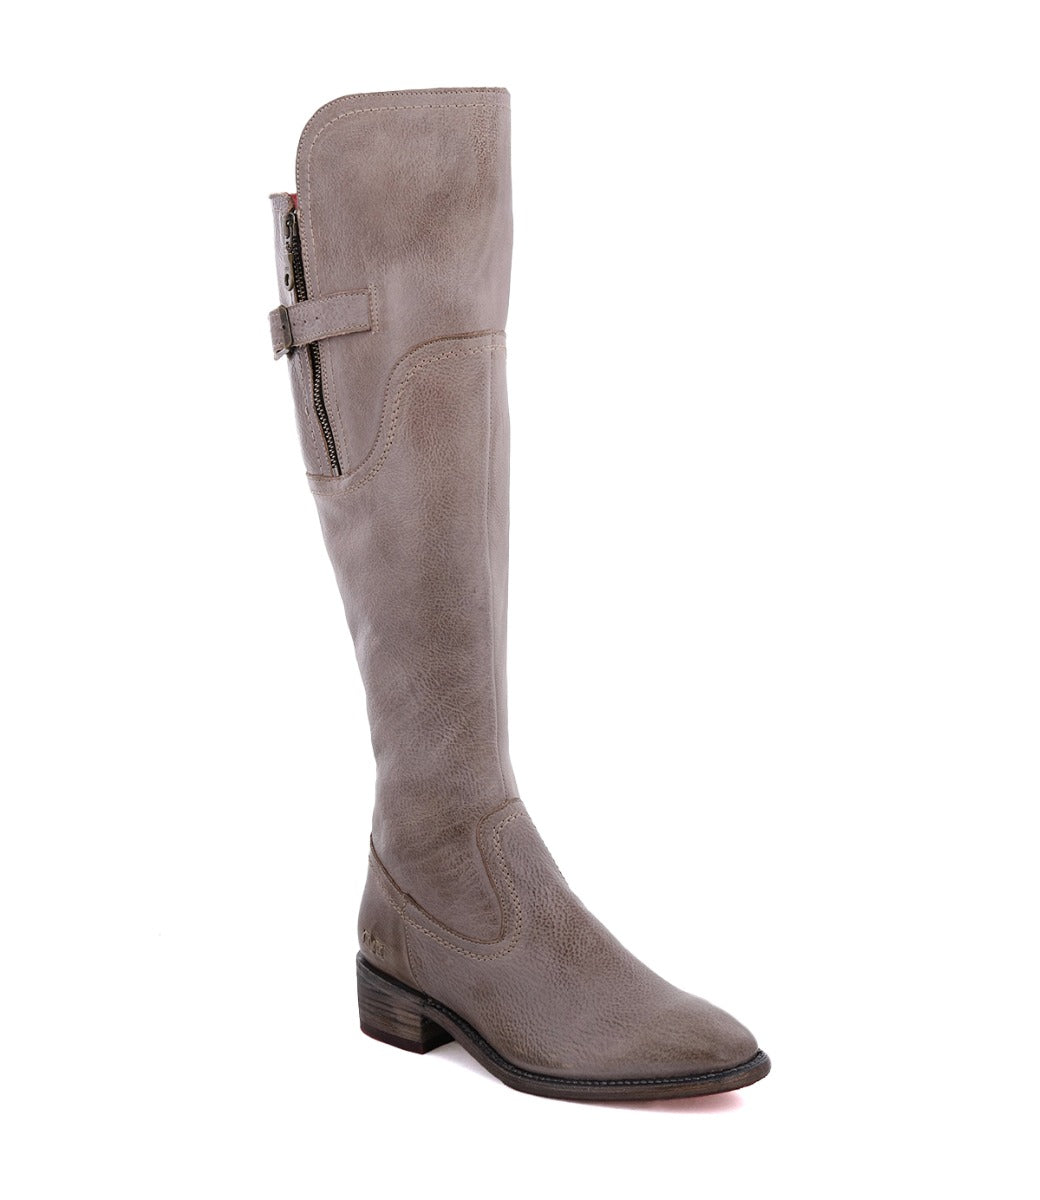 A women's Kathleen boot with a zipper on the side by Bed Stu.